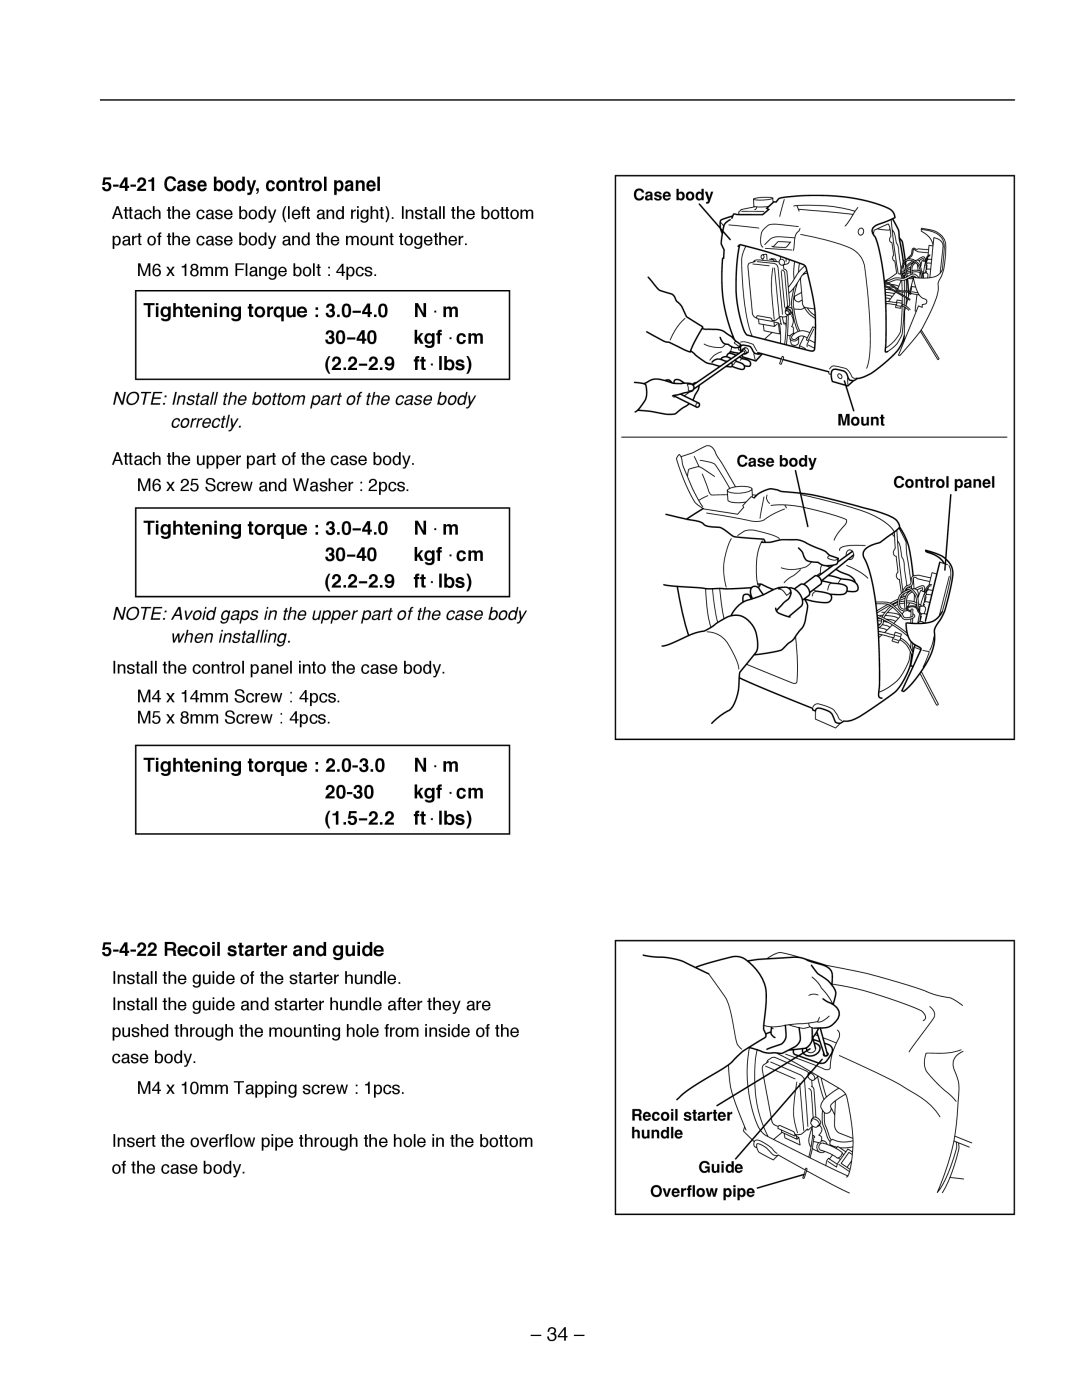 Subaru Robin Power Products R1700i service manual 5-4-21Case body, control panel, 5-4-22Recoil starter and guide 